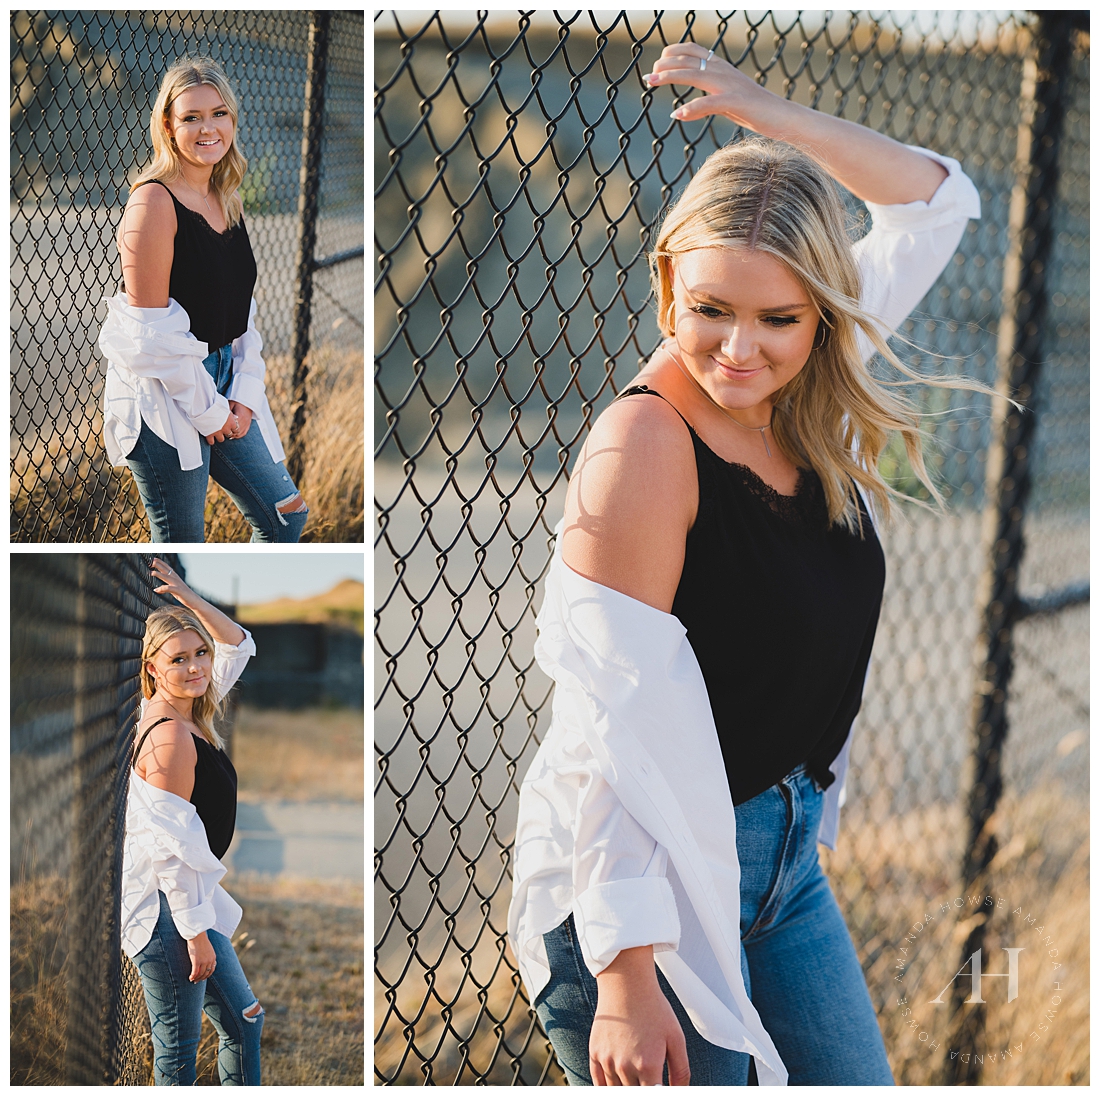 B&W Style Guide for Senior Portraits | Amazing Outfit Ideas for Summer, White Button Up and Jeans | Photographed by the Best Tacoma Senior Photographer Amanda Howse Photography